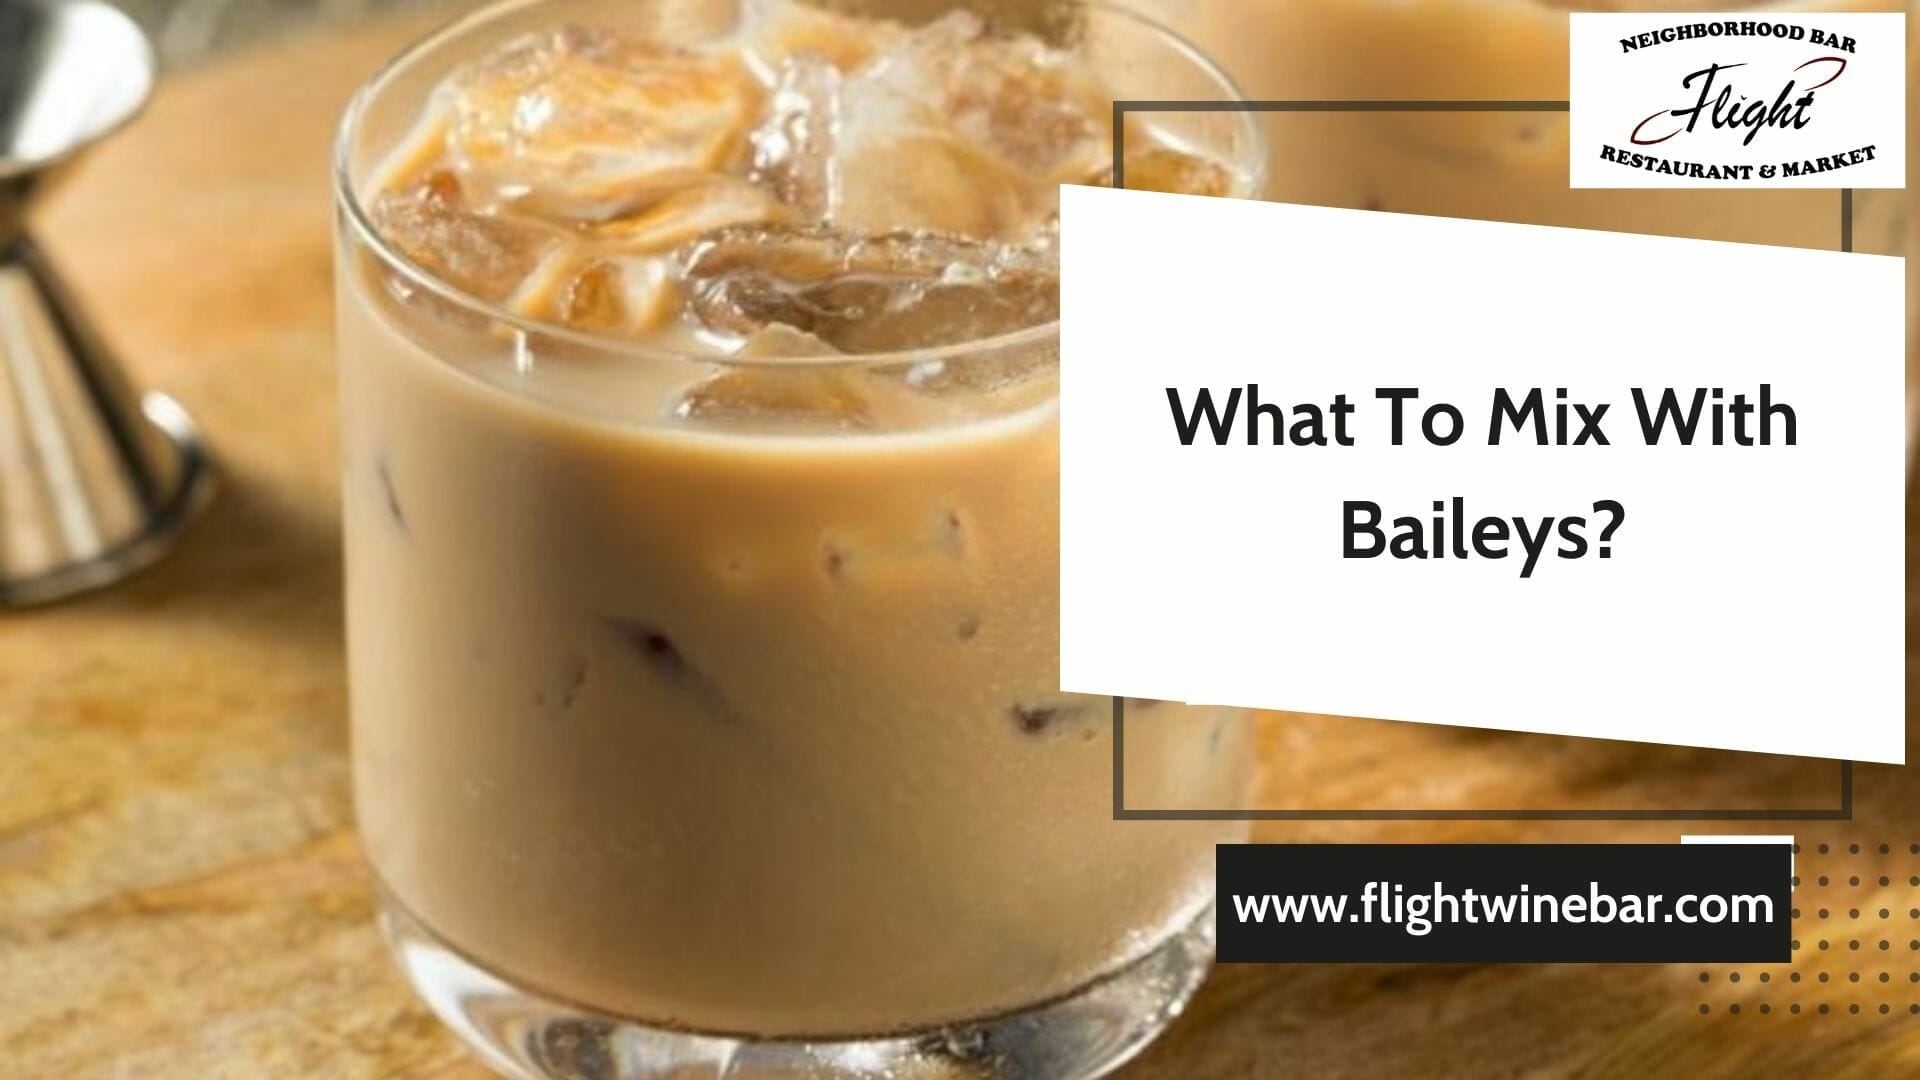 What To Mix With Baileys